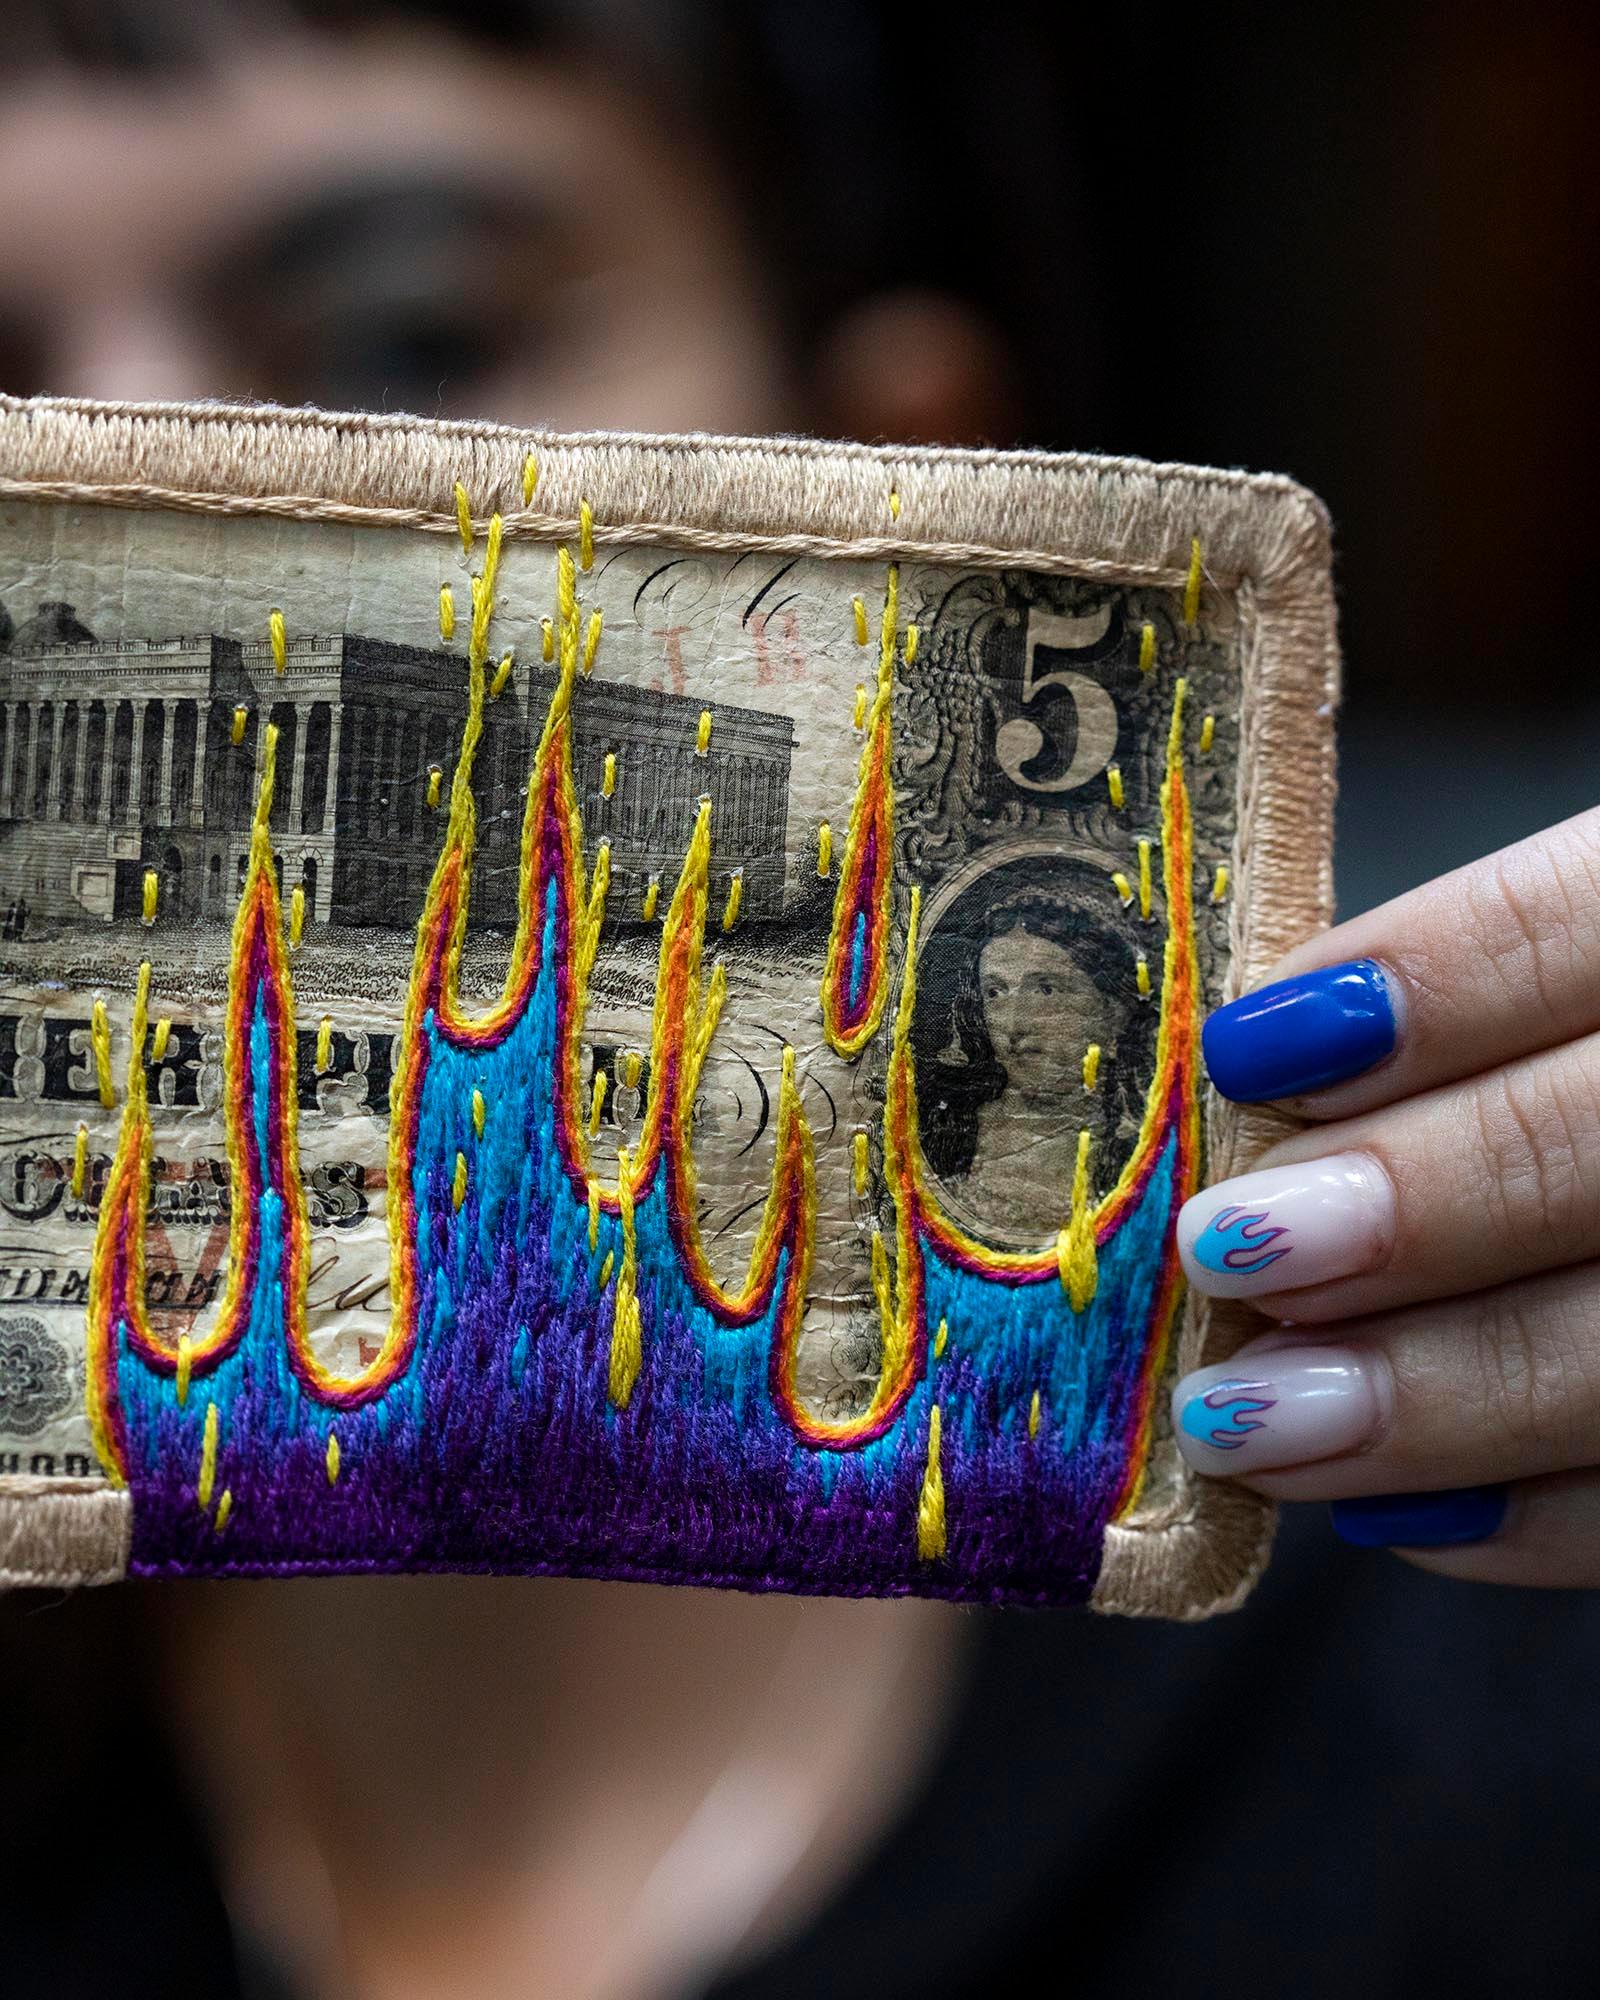 Stacey Lee Webber

Obsoletes: Providence Fire

4.5” x 8.75” acrylic case

hand stitched vintage obsolete US currency, signed on back

2022